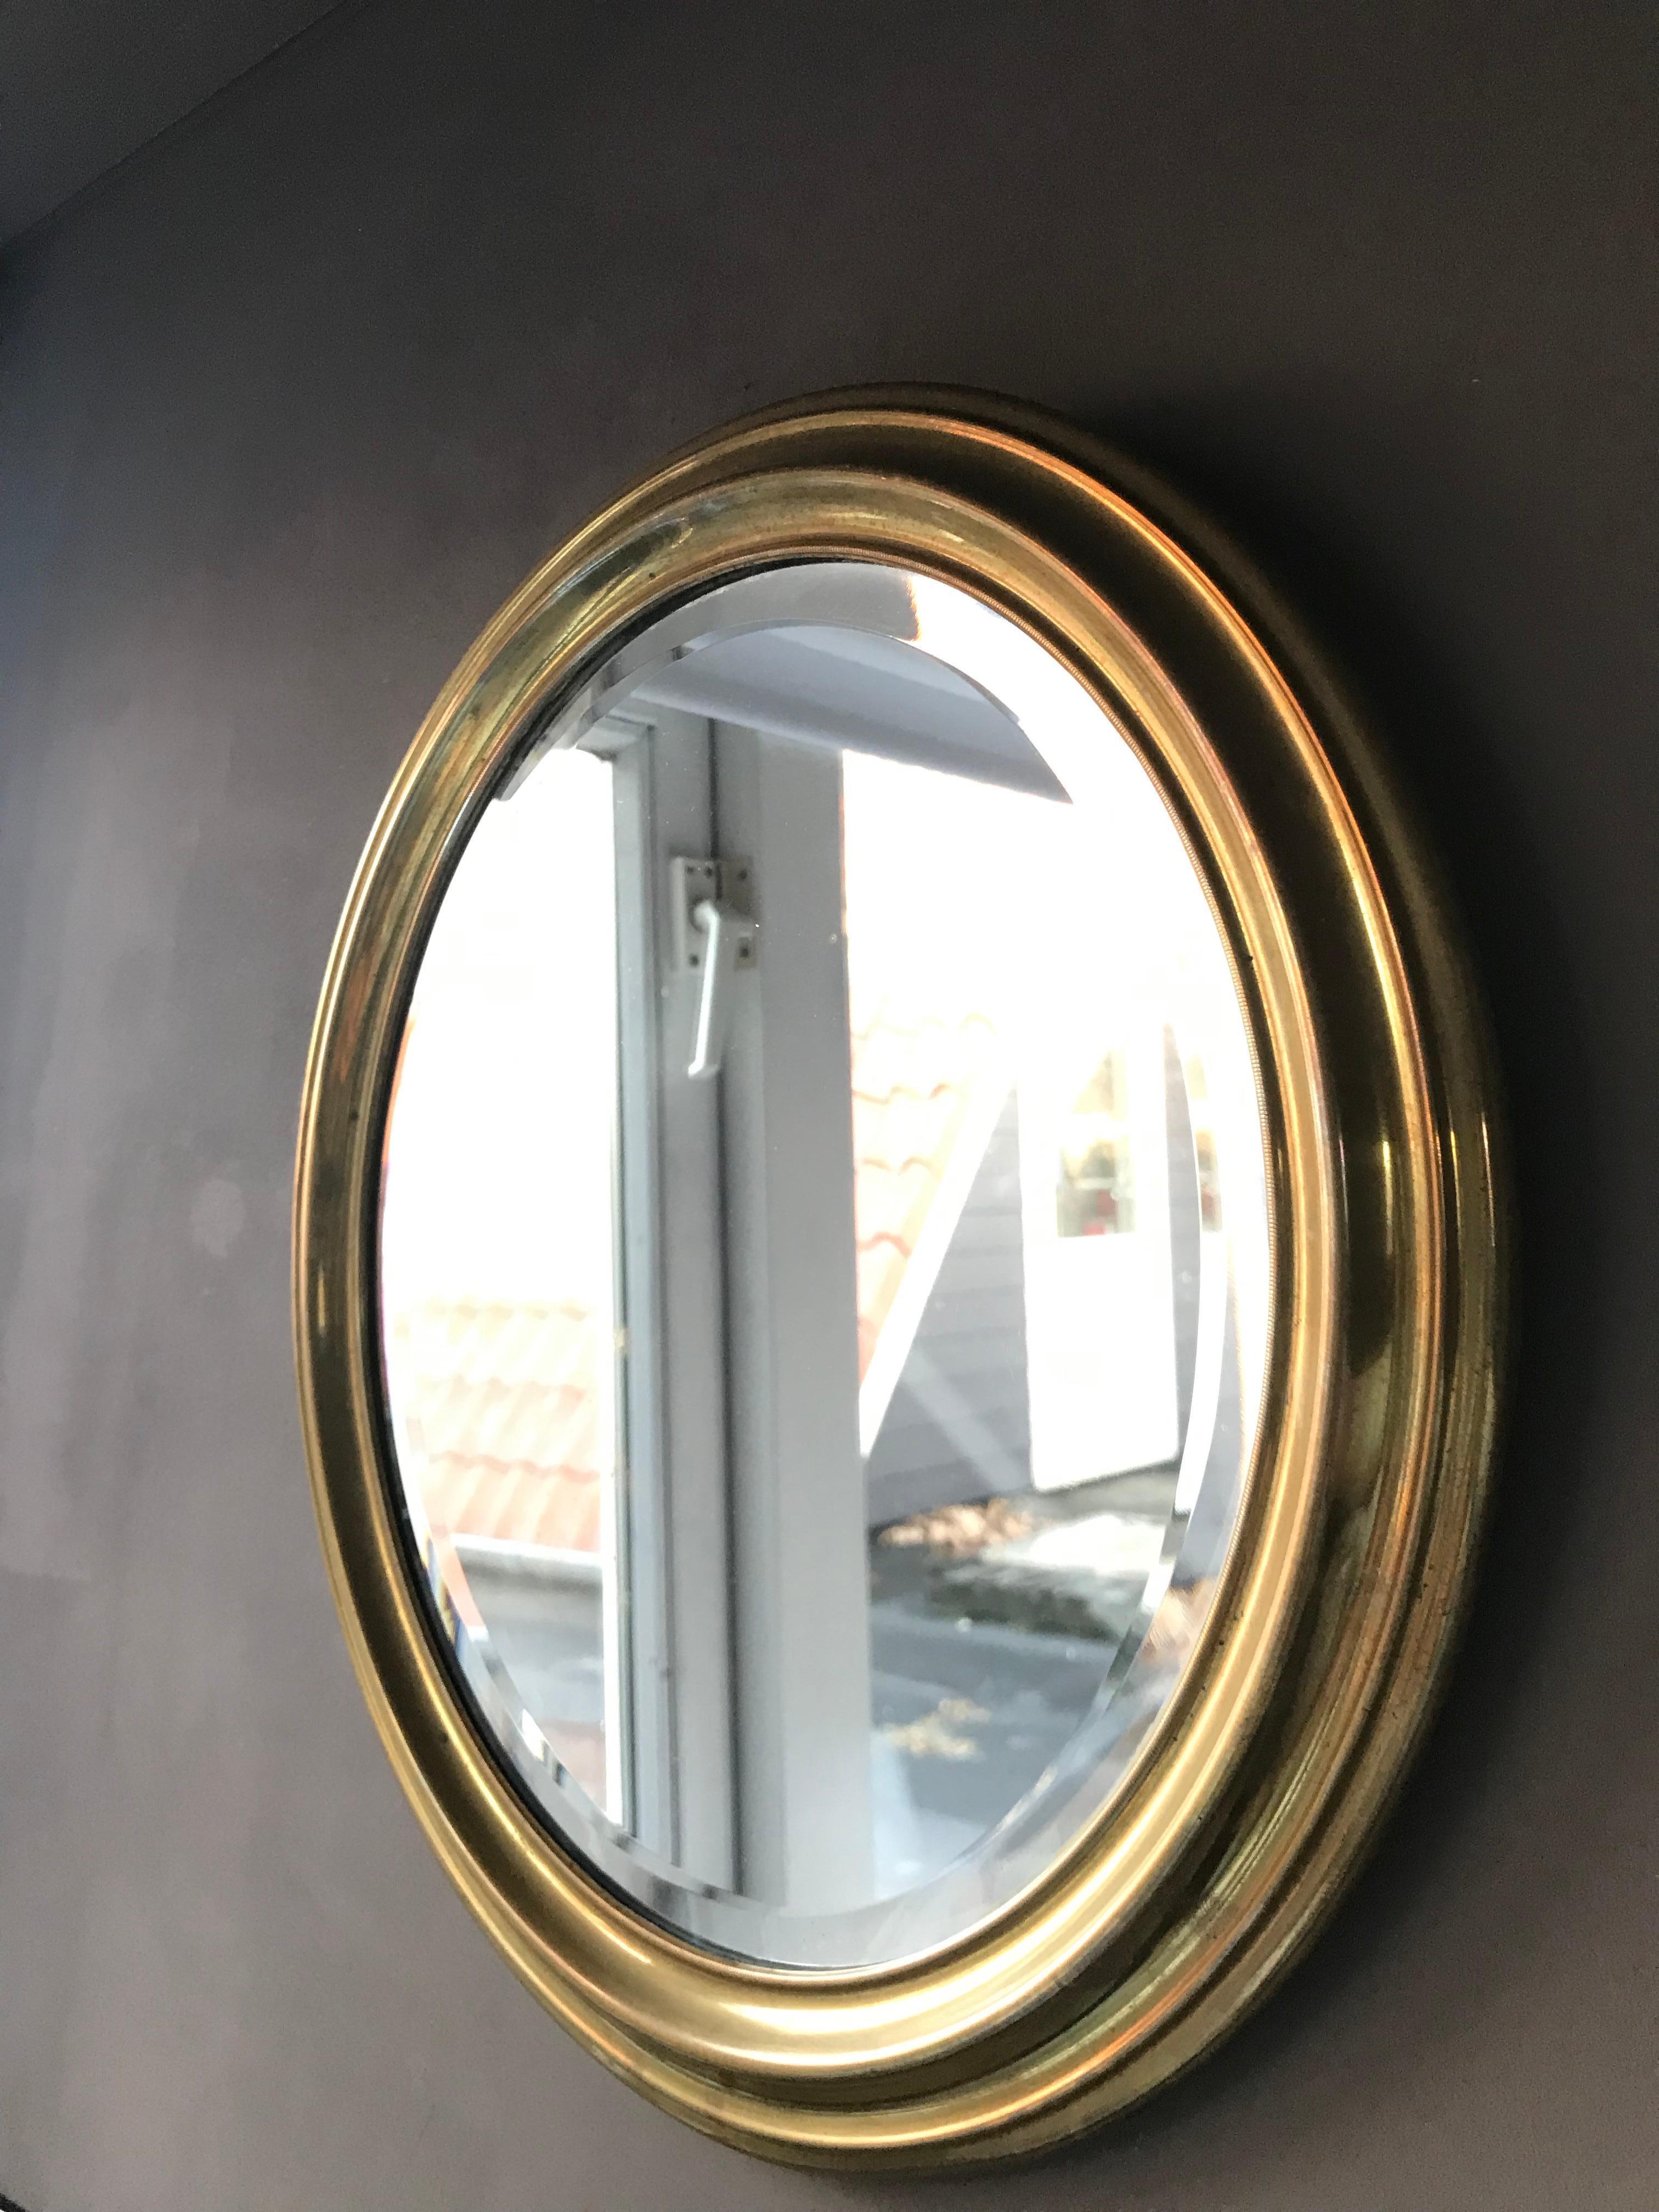 Oval mirror in brass, mirror glass with cut edge.